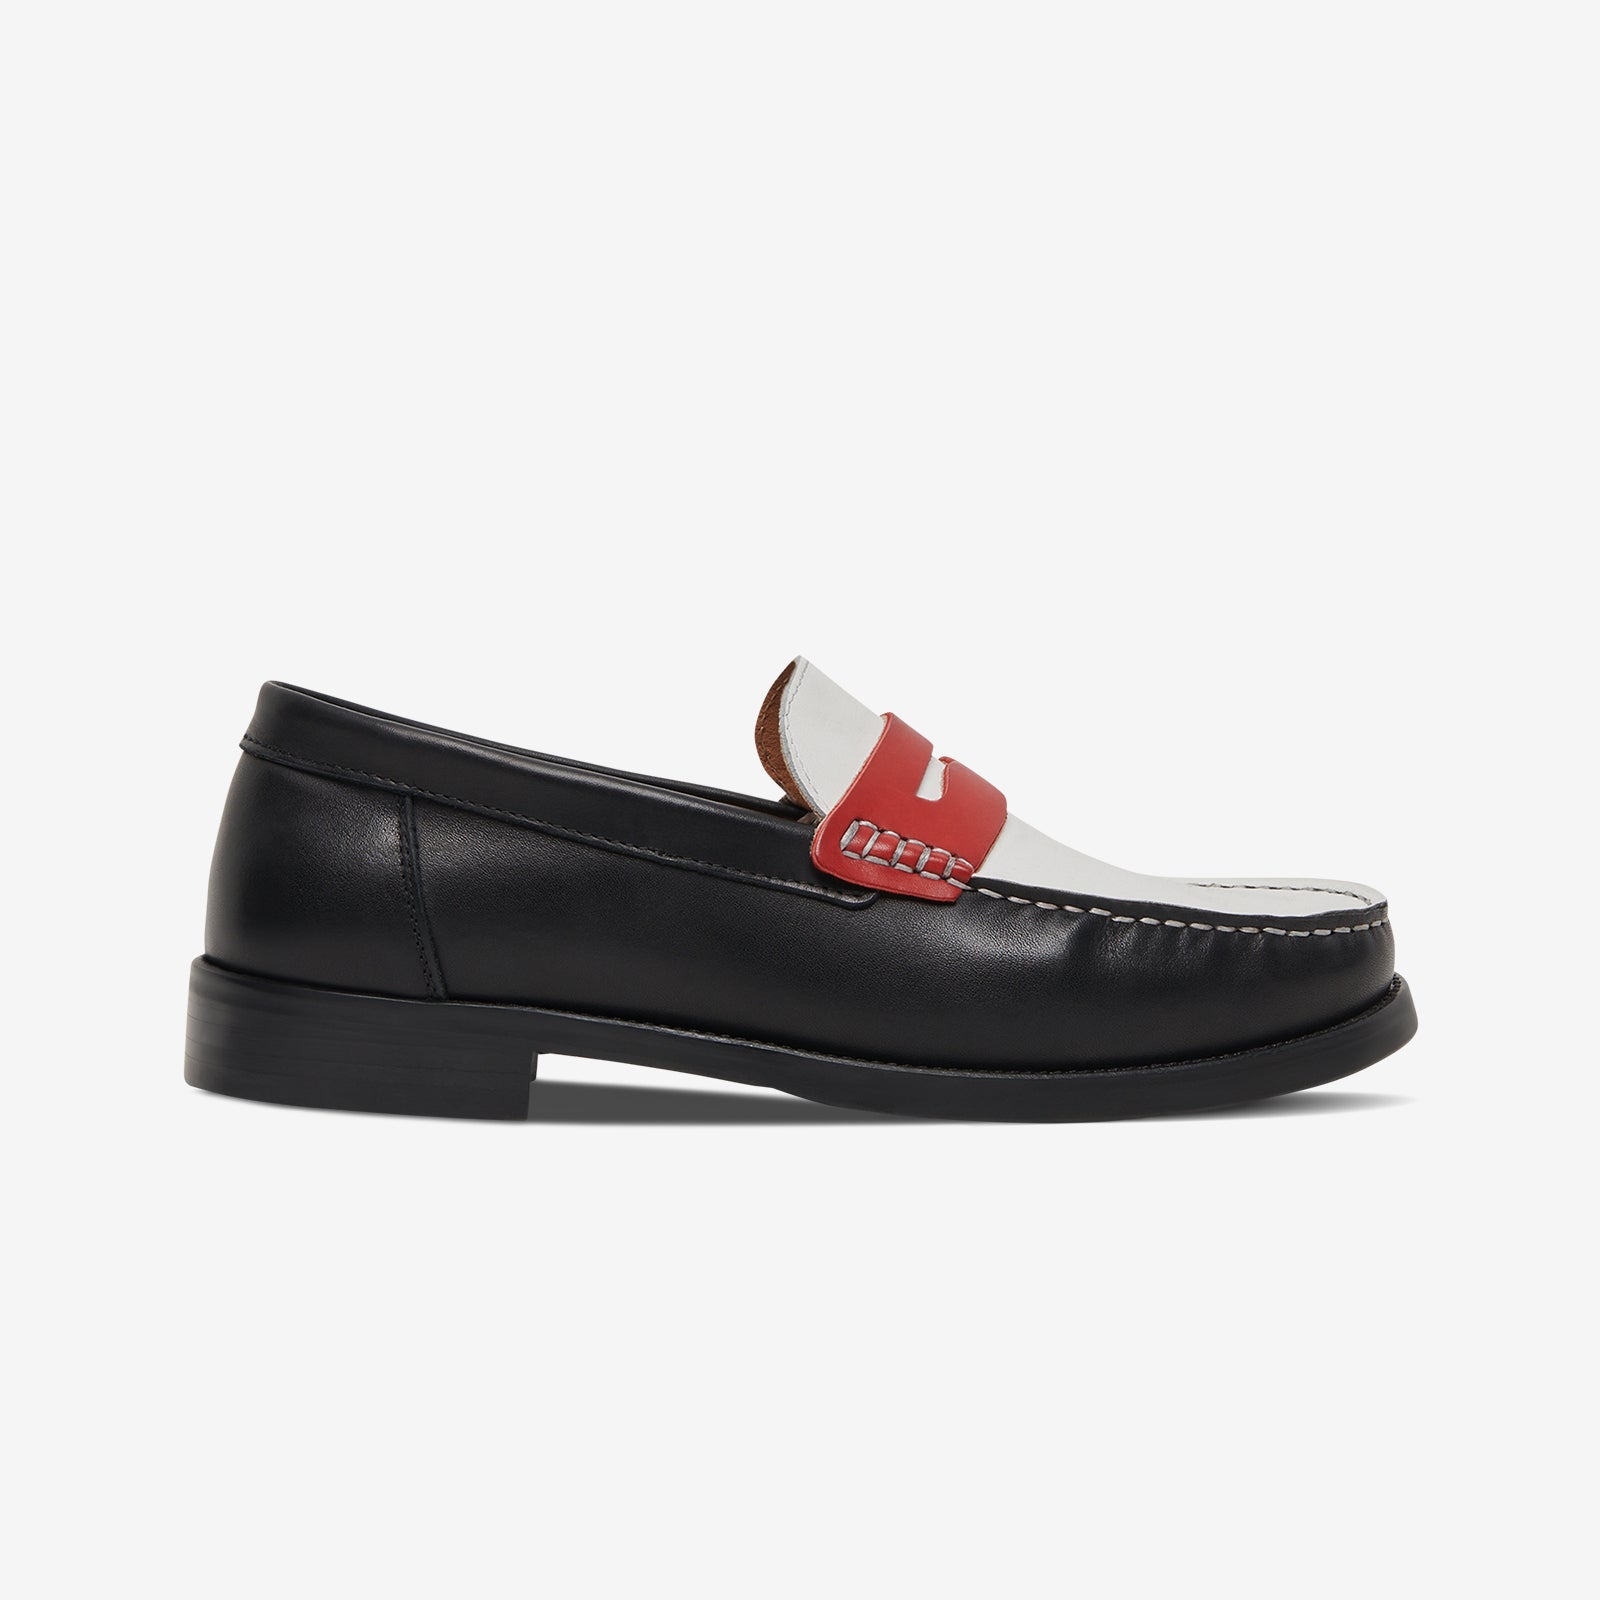 GUCCI LOAFERS REVIEW 2020 - New Gucci Loafers Vs Old Gucci Loafers, Gucci  Shoes